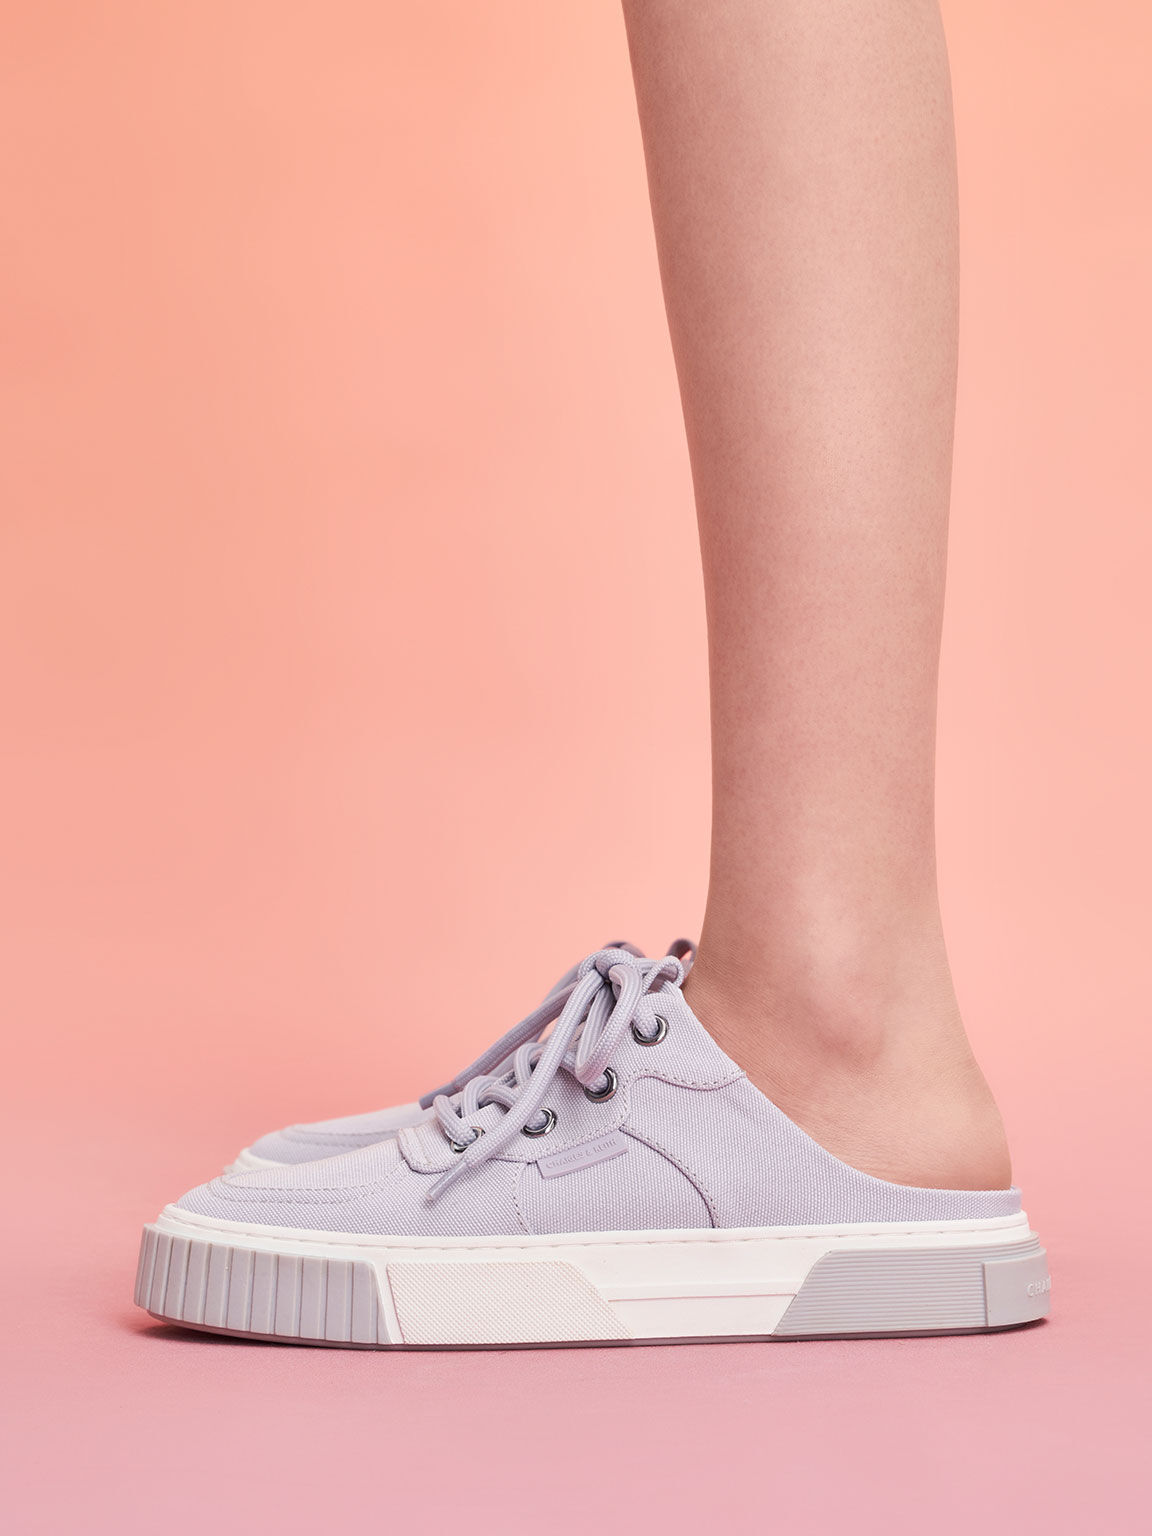 Canvas Panelled Slip-On Sneakers, Lilac, hi-res